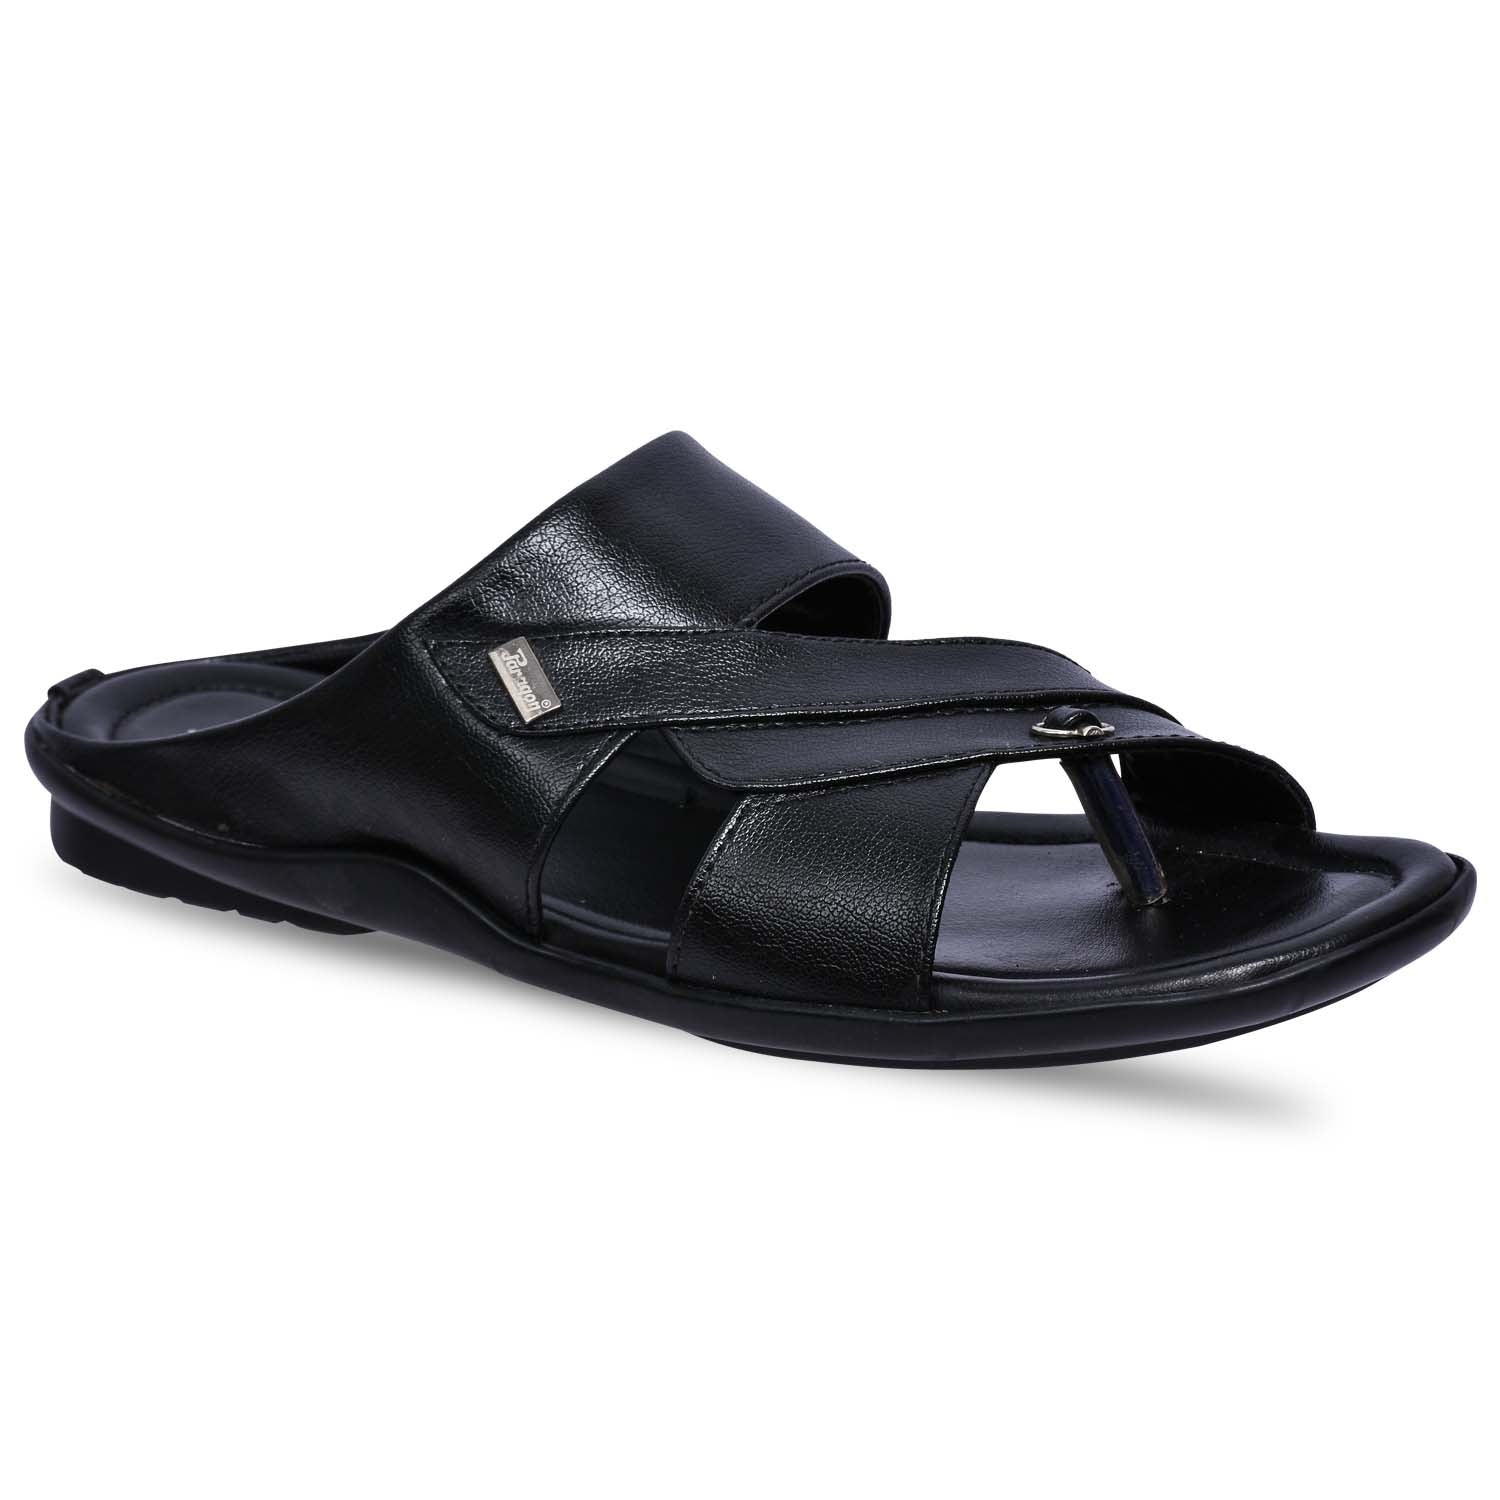 Paragon R4002G Men Stylish Sandals | Comfortable Sandals for Daily Outdoor Use | Casual Formal Sandals with Cushioned Soles